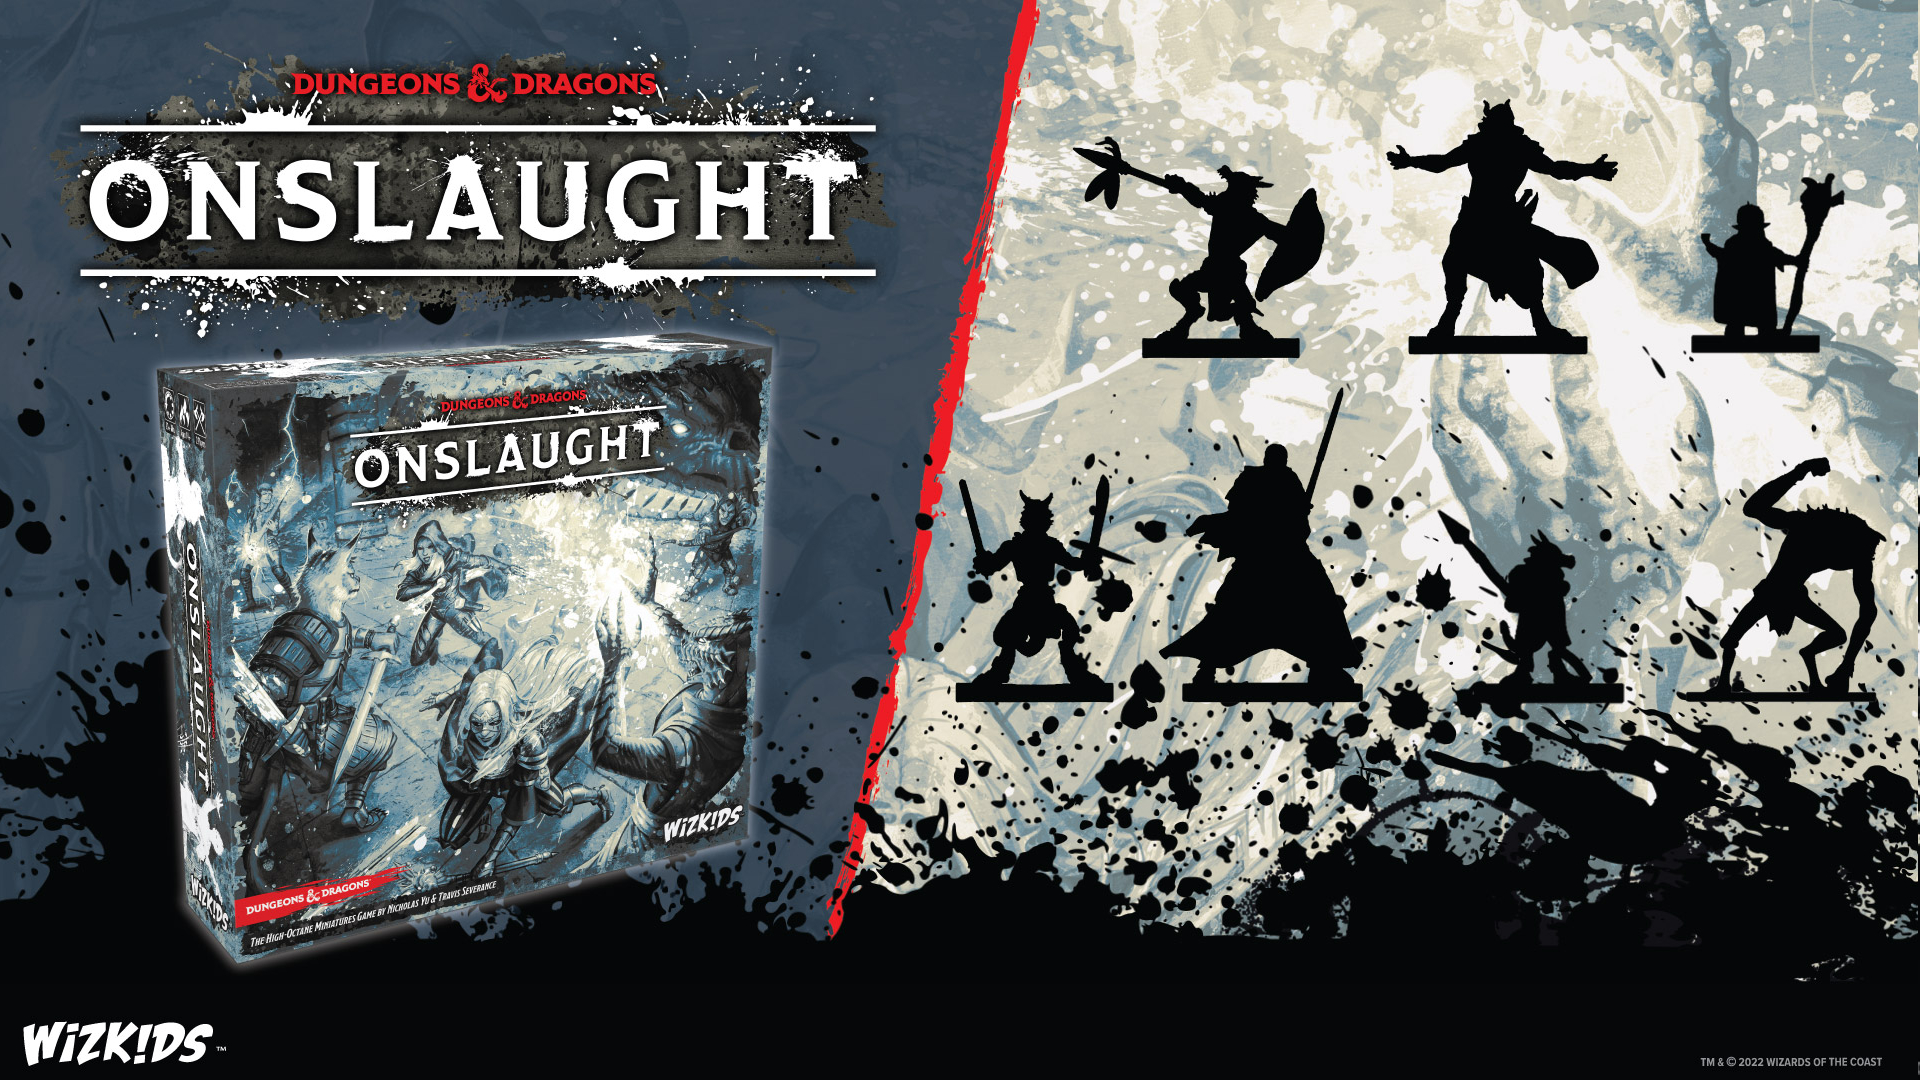 Dungeons & Dragons Onslaught Images Revealed